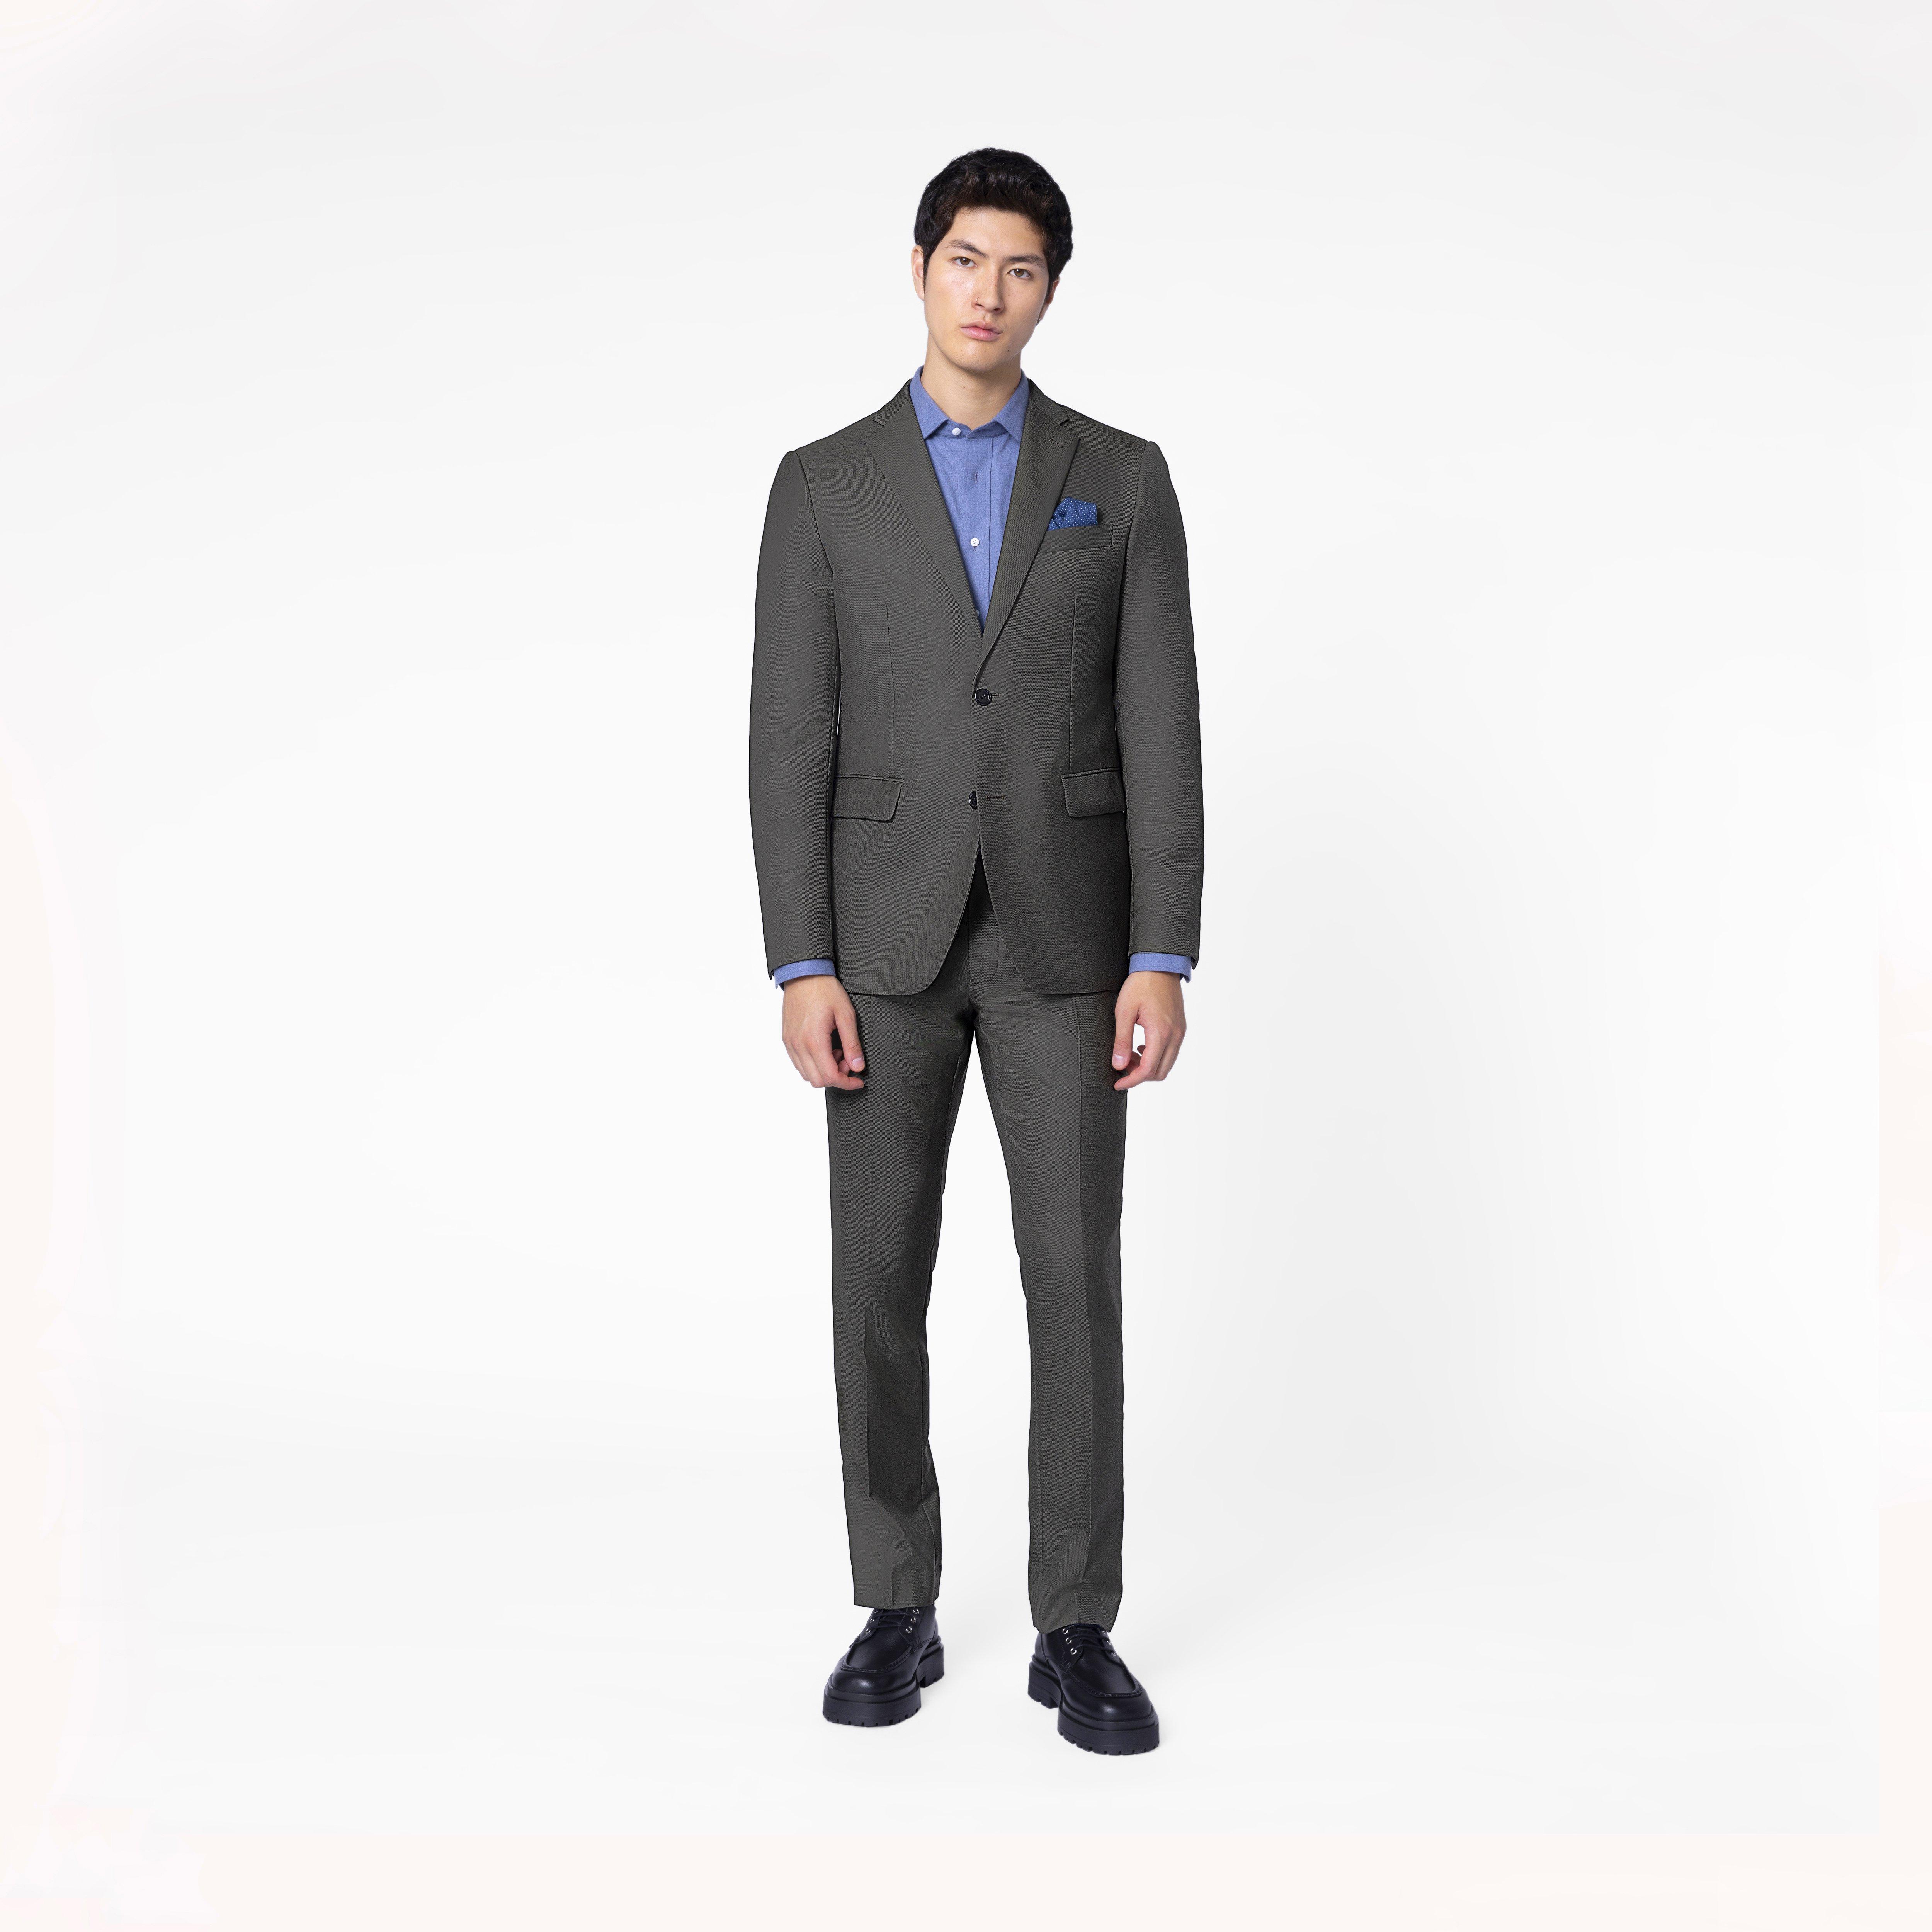 Custom Suits Made For You - Johnby Twill Olive Suit | INDOCHINO